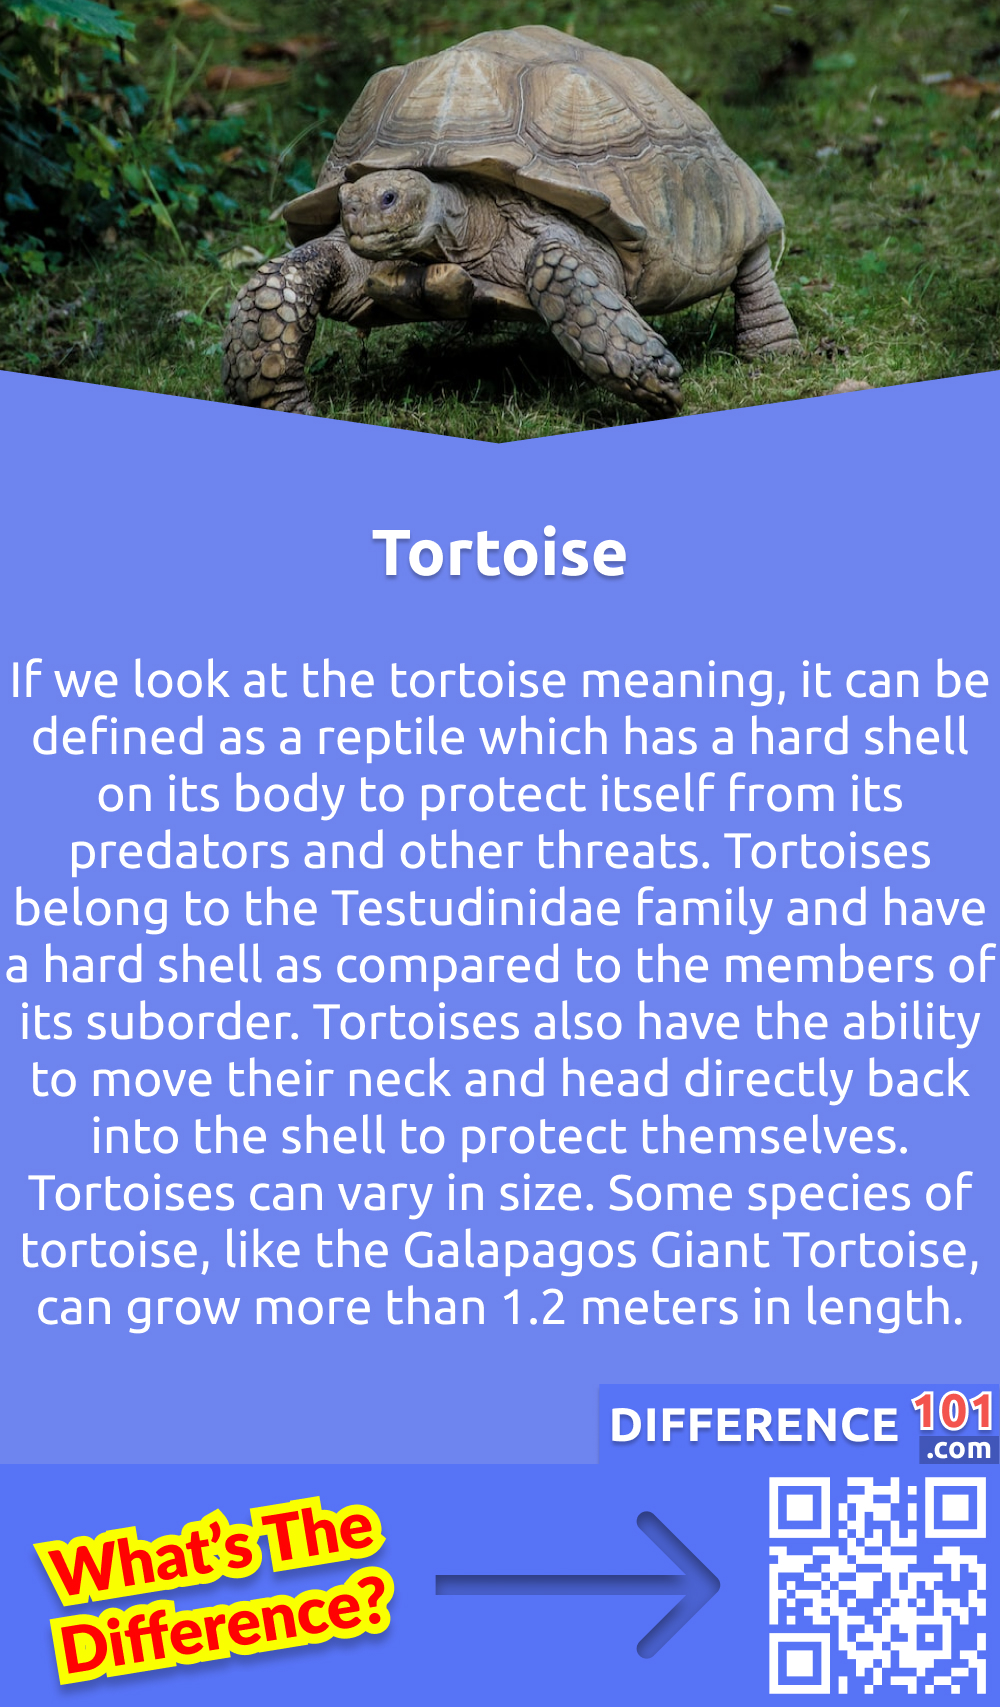 What Is a Tortoise? If we look at the tortoise meaning, it can be defined as a reptile which has a hard shell on its body to protect itself from its predators and other threats. Tortoises belong to the Testudinidae family and have a hard shell as compared to the members of its suborder. Tortoises also have the ability to move their neck and head directly back into the shell to protect themselves. Tortoises can vary in size. Some species of tortoise, like the Galapagos Giant Tortoise, can grow more than 1.2 meters in length. At the same time, some species, like Speckled Cape Tortoise, have only 6.8 centimeters long shells. Like Aldabra Giant Tortoise, various tortoises also evolve a large body size of more than 100 kg. Tortoises are one of the longest-living animals present on the land. Galapagos tortoises are noted to live for more than 150 years.
